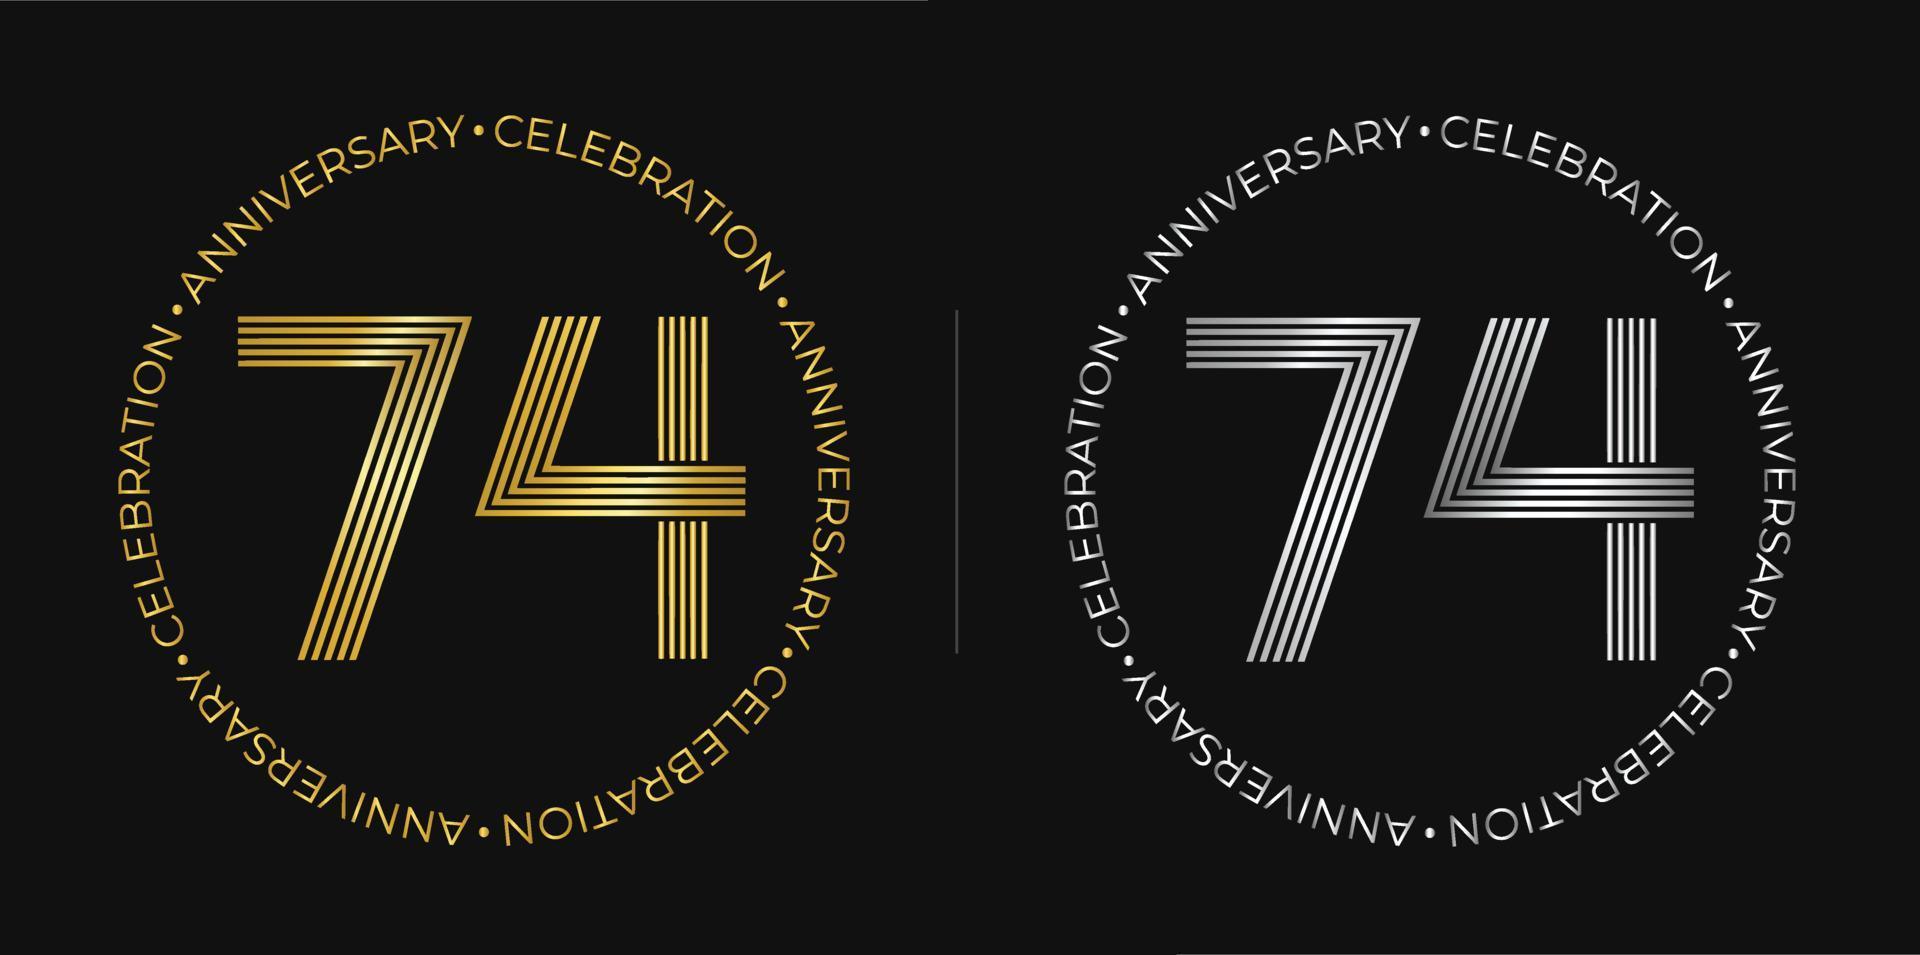 74th birthday. Seventy-four years anniversary celebration banner in golden and silver colors. Circular logo with original numbers design in elegant lines. vector